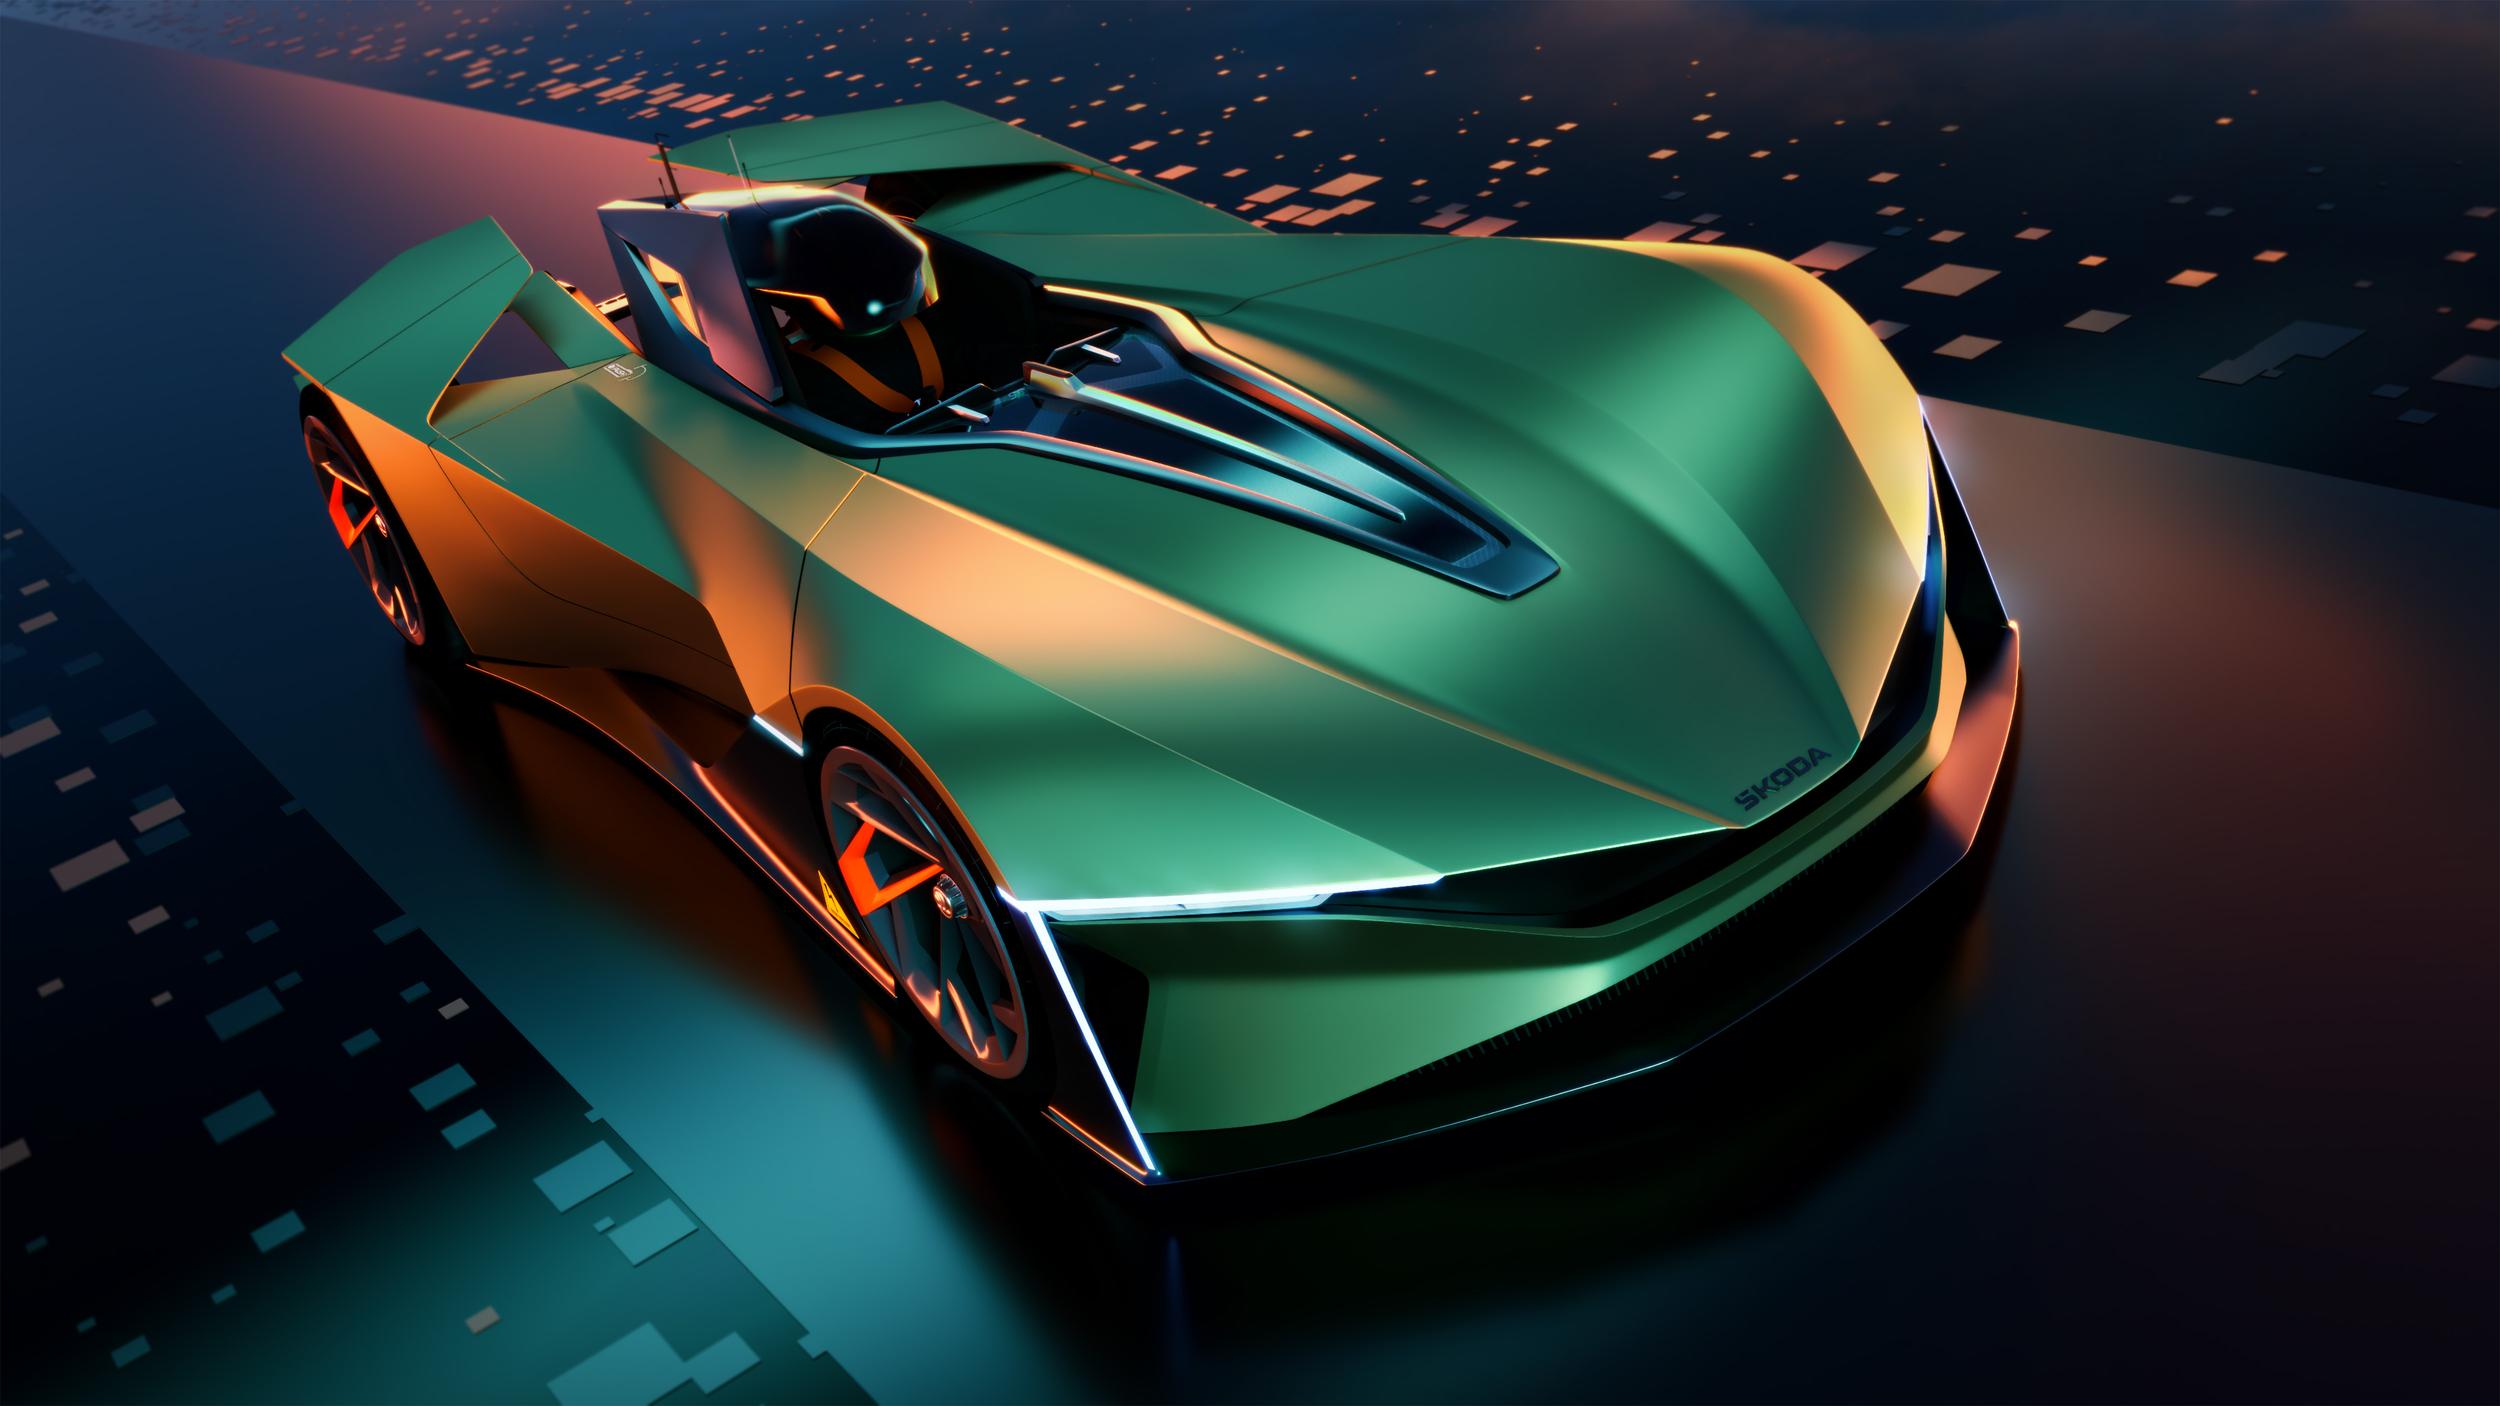 The koda Vision Gran Turismo design concept is in a popular video game series